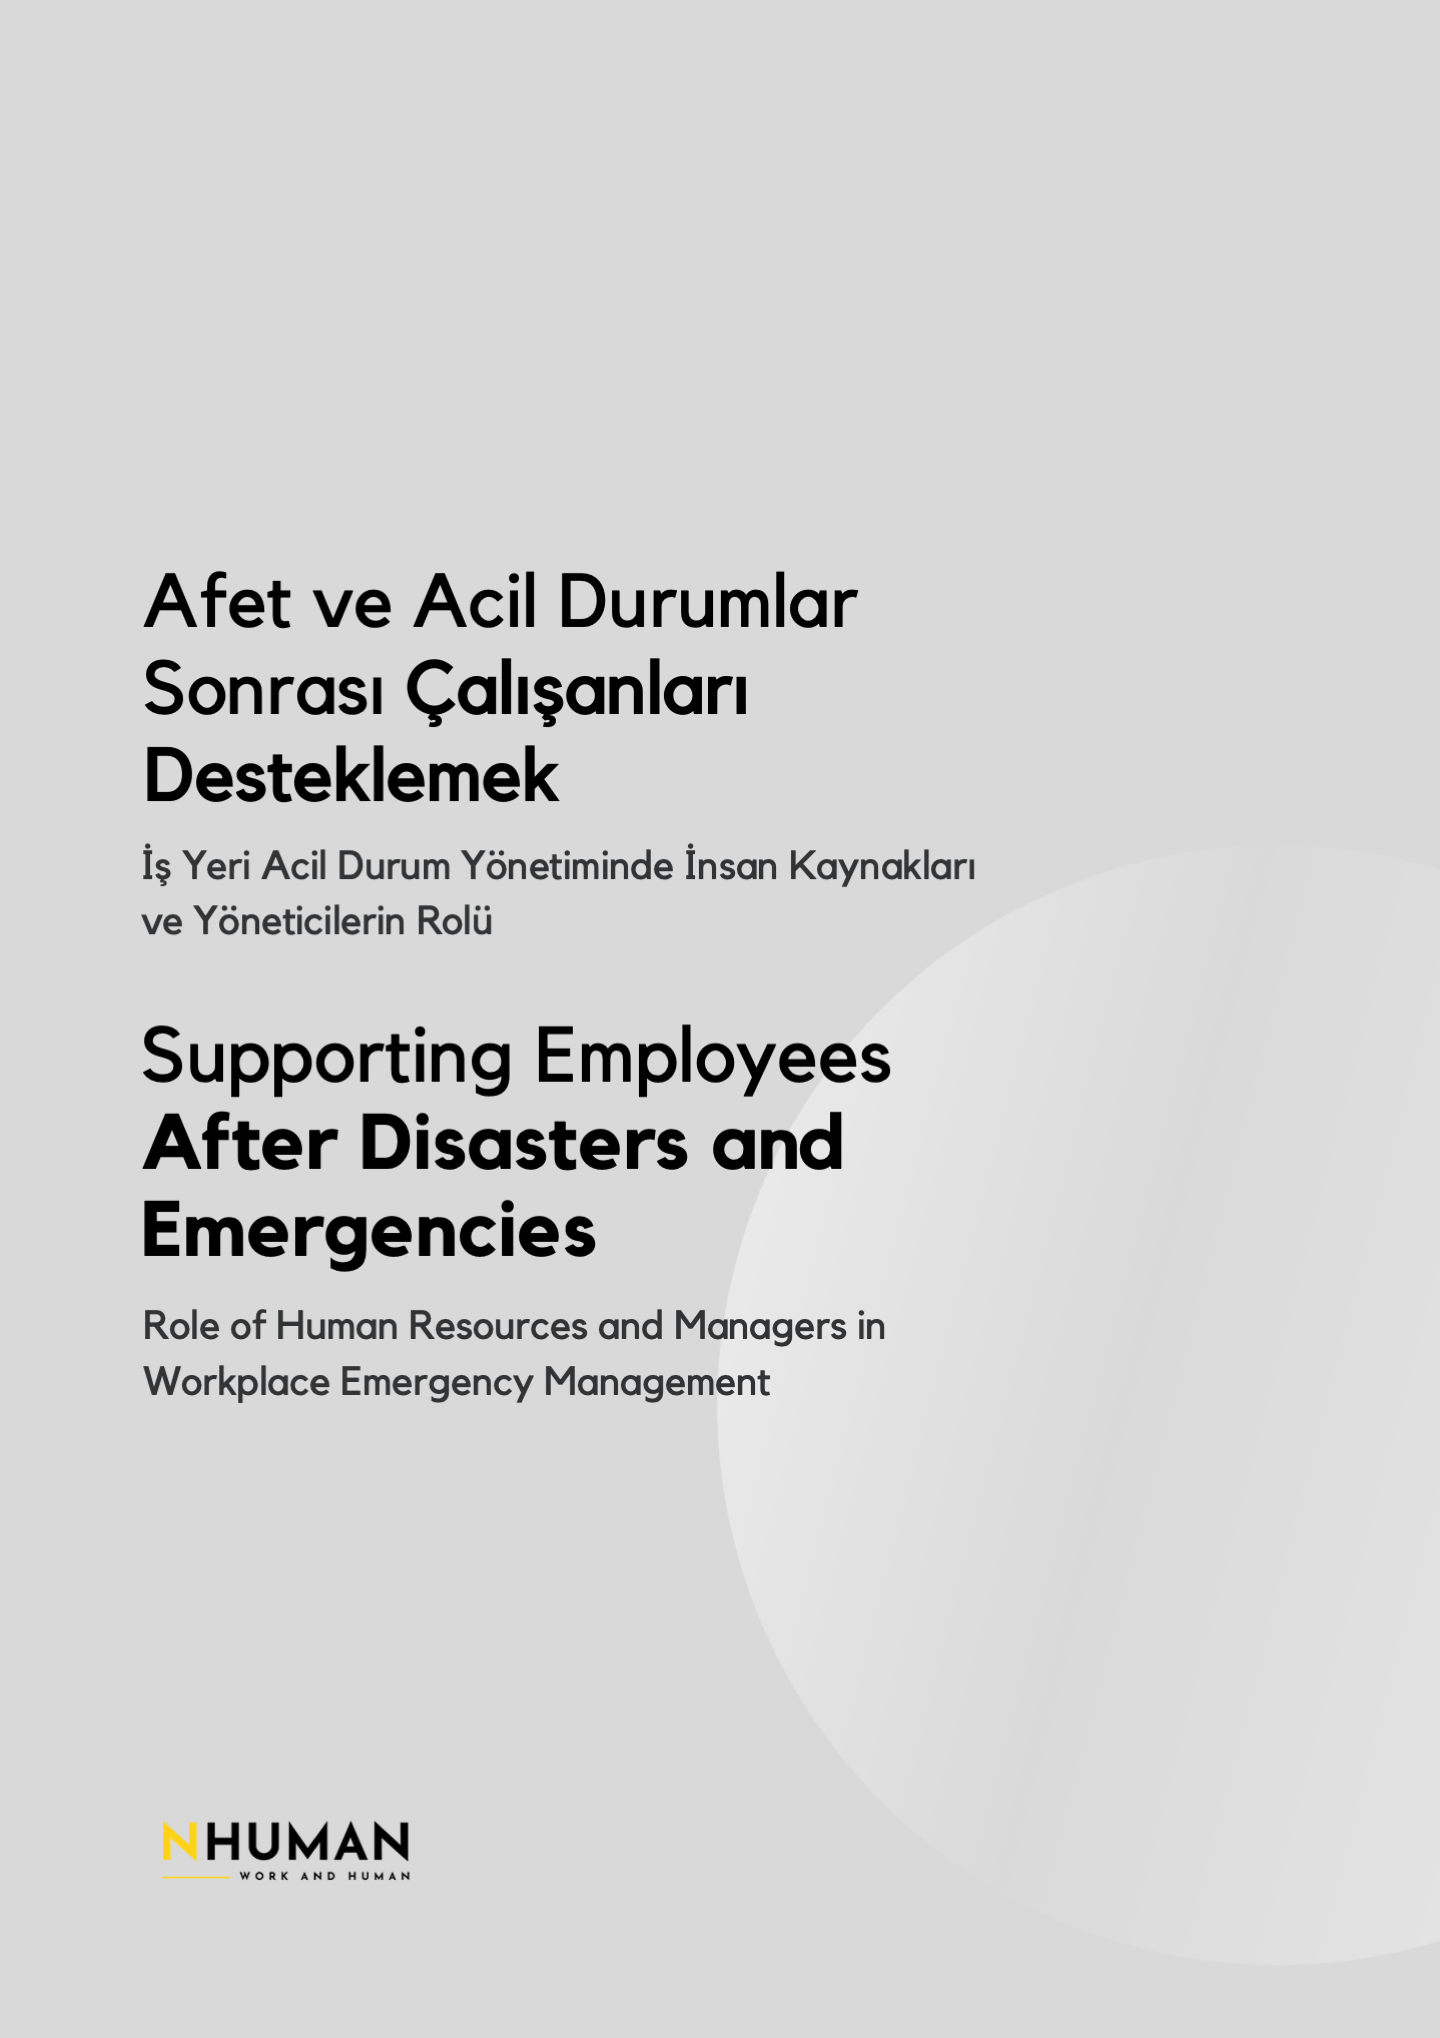 Supporting Employees After Disasters and Emergencies